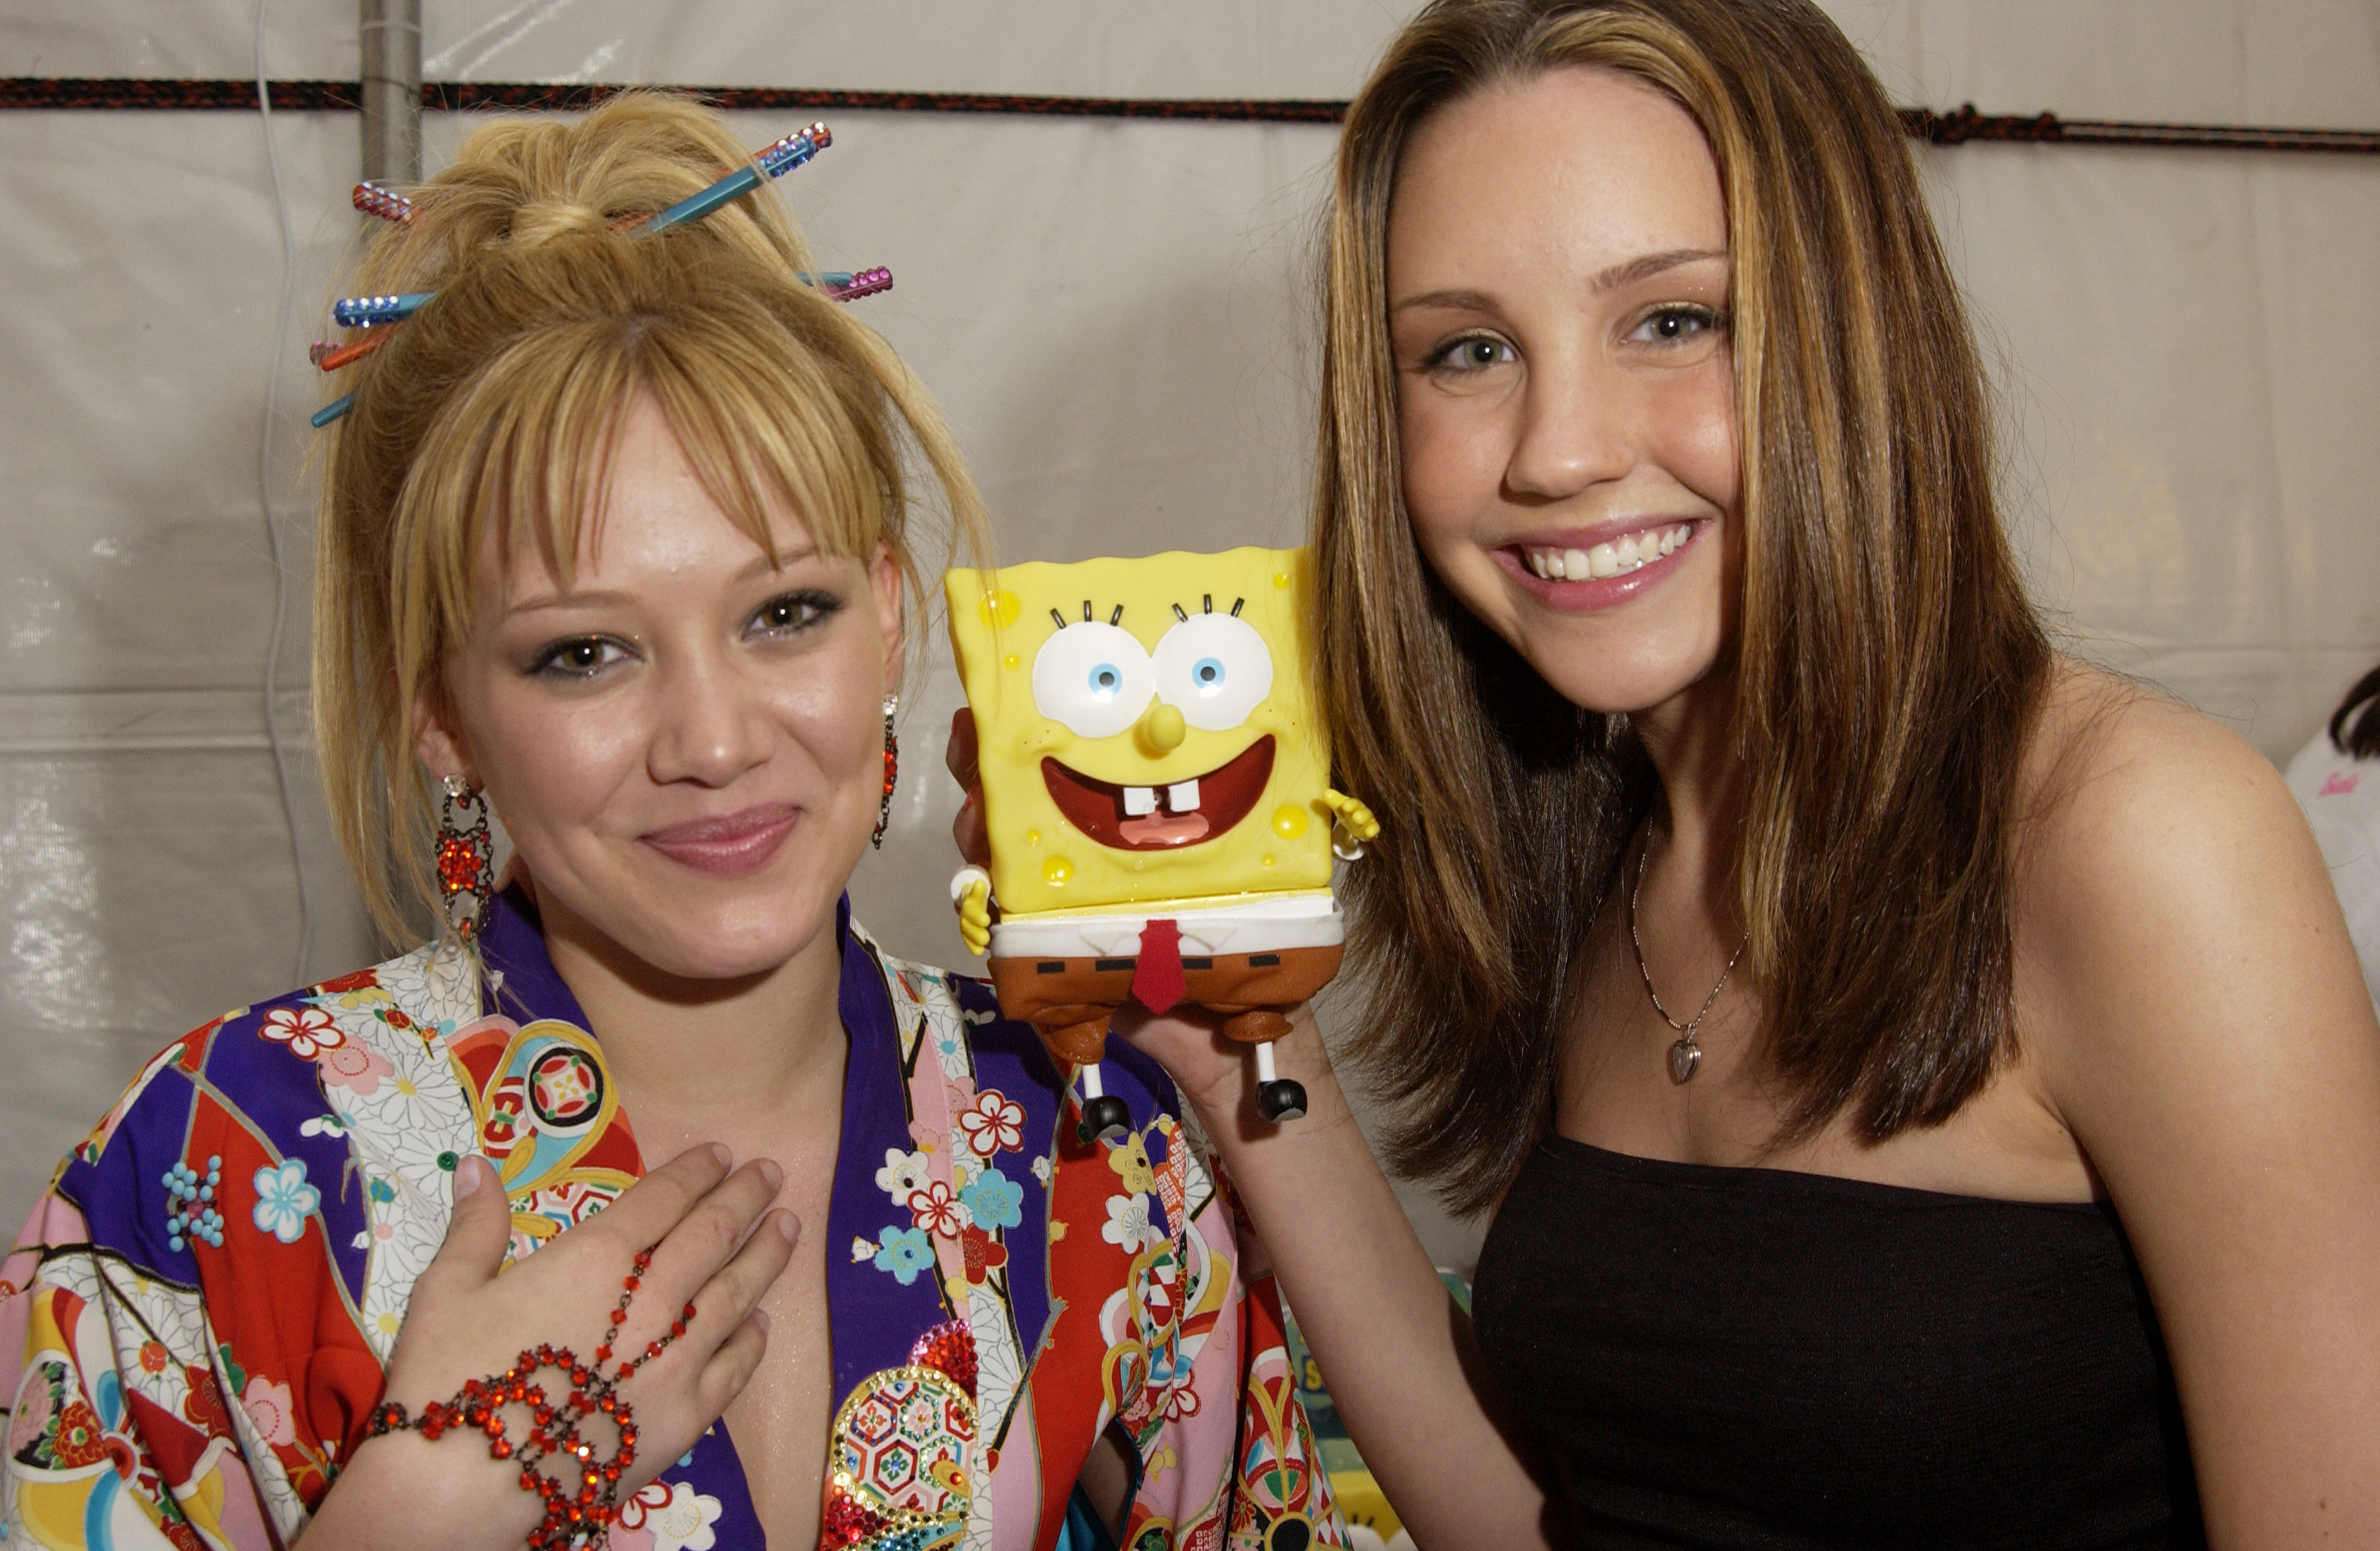 Hilary Duff and Amanda Bynes with Sponge Bob Square Pants on April 20, 2002 | Source: Getty Images